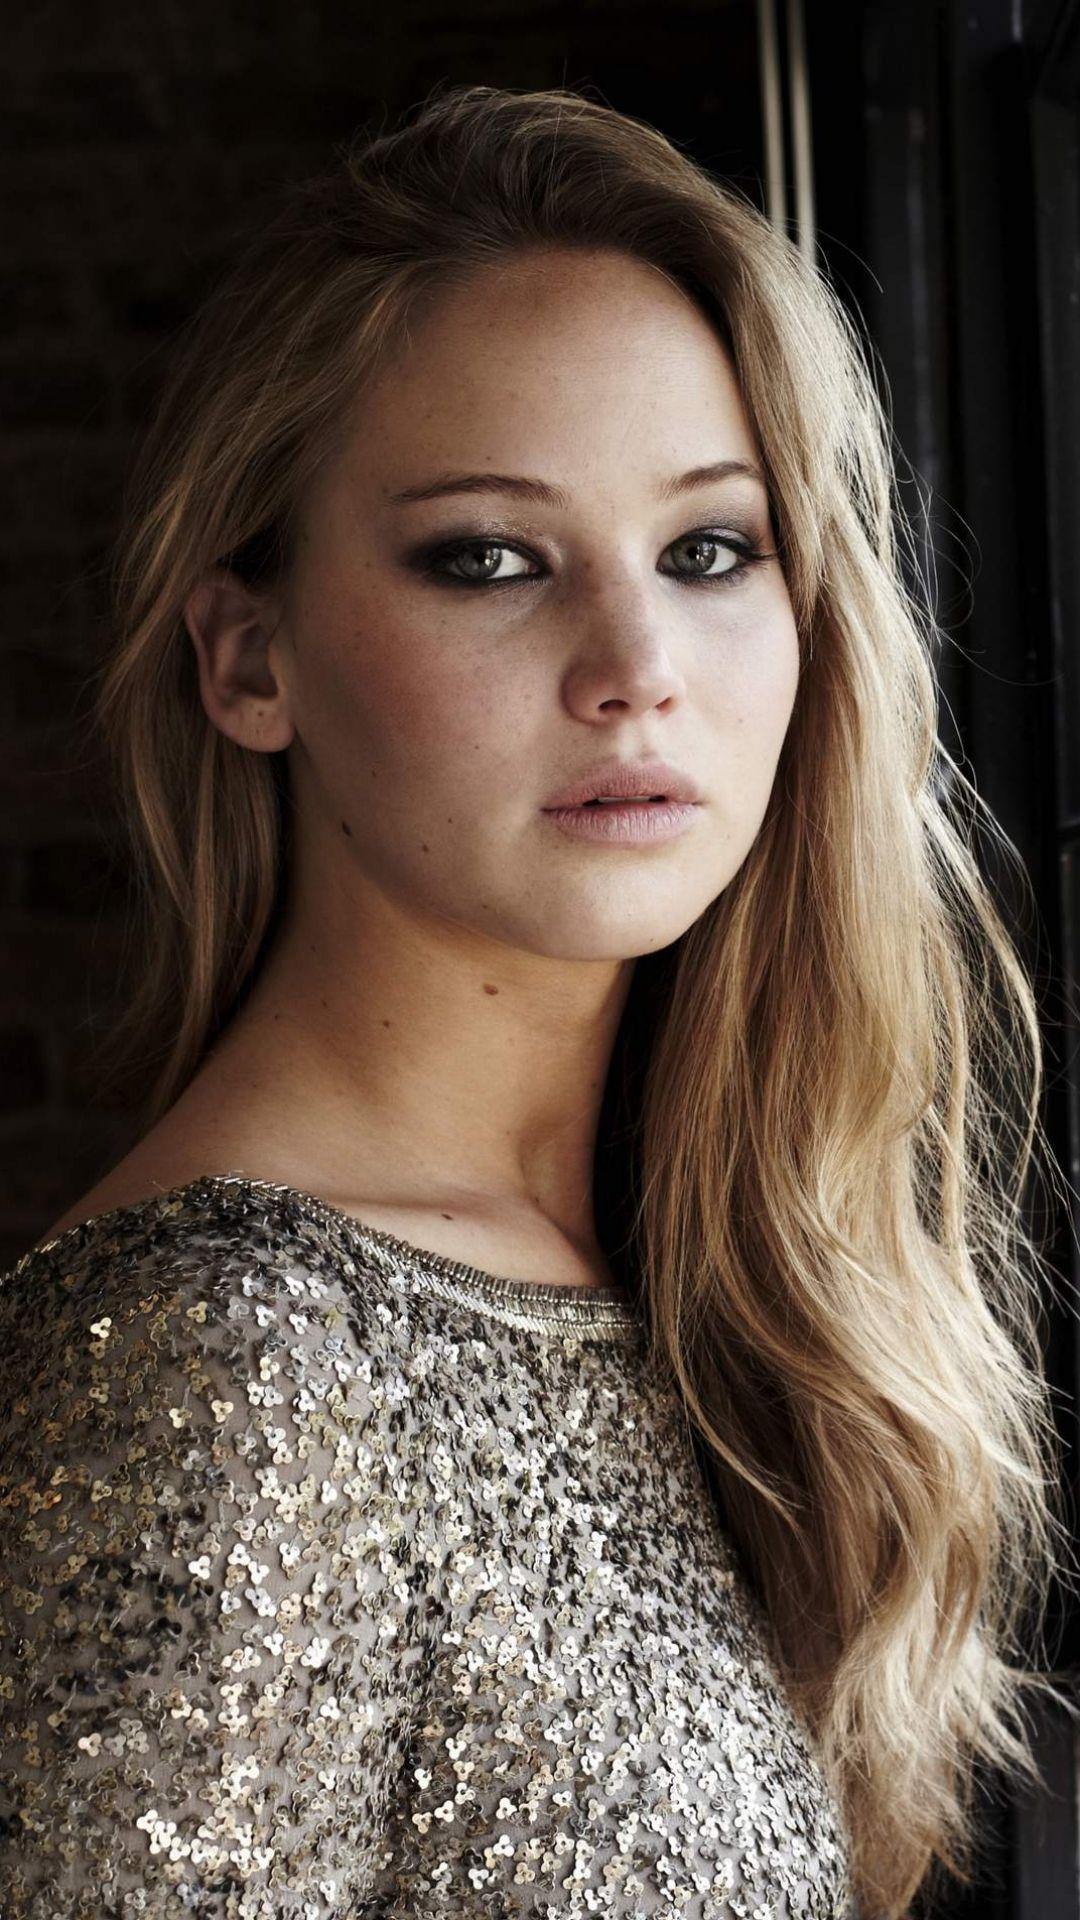 Jennifer Lawrence is an American actress and producer. She rose to fame after her performance in the film 'The Hunger Games'. She has won several awards including an Academy Award, a Golden Globe Award, and a Critics' Choice Movie Award. - Jennifer Lawrence